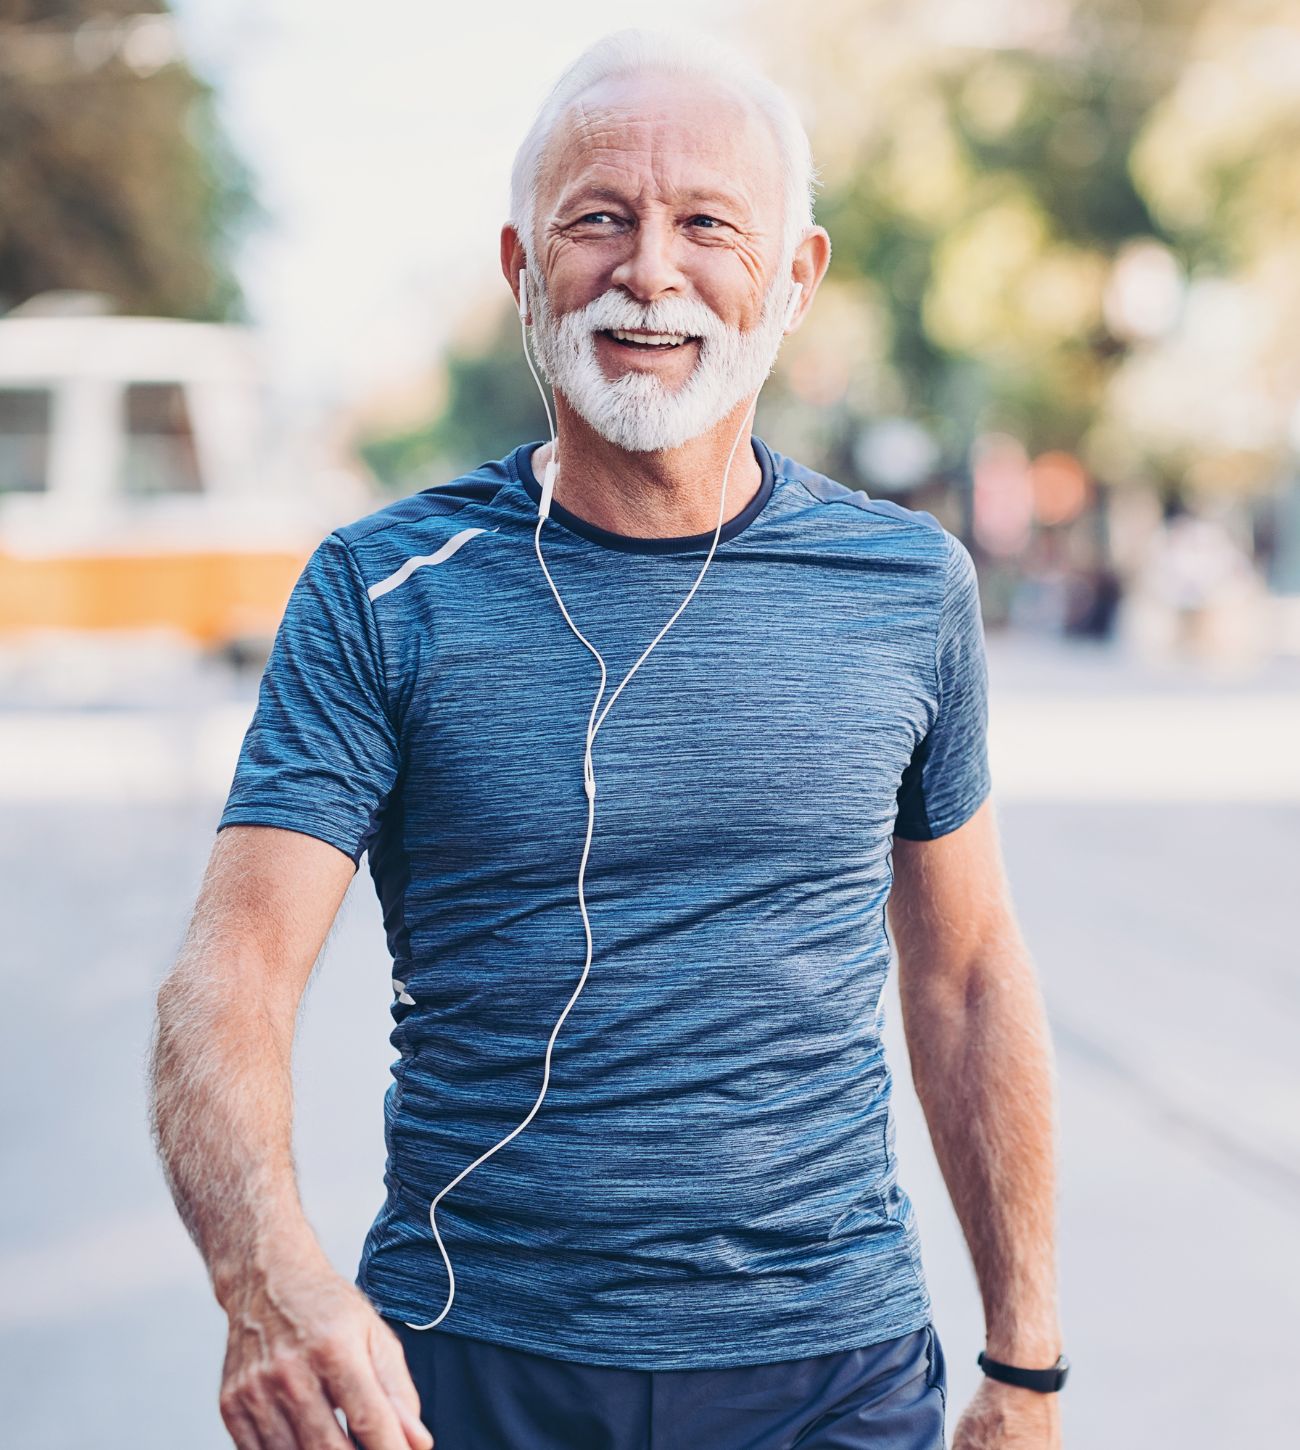 Photo of a mature fit man walking while listening to a podcast or music on wired headphones.